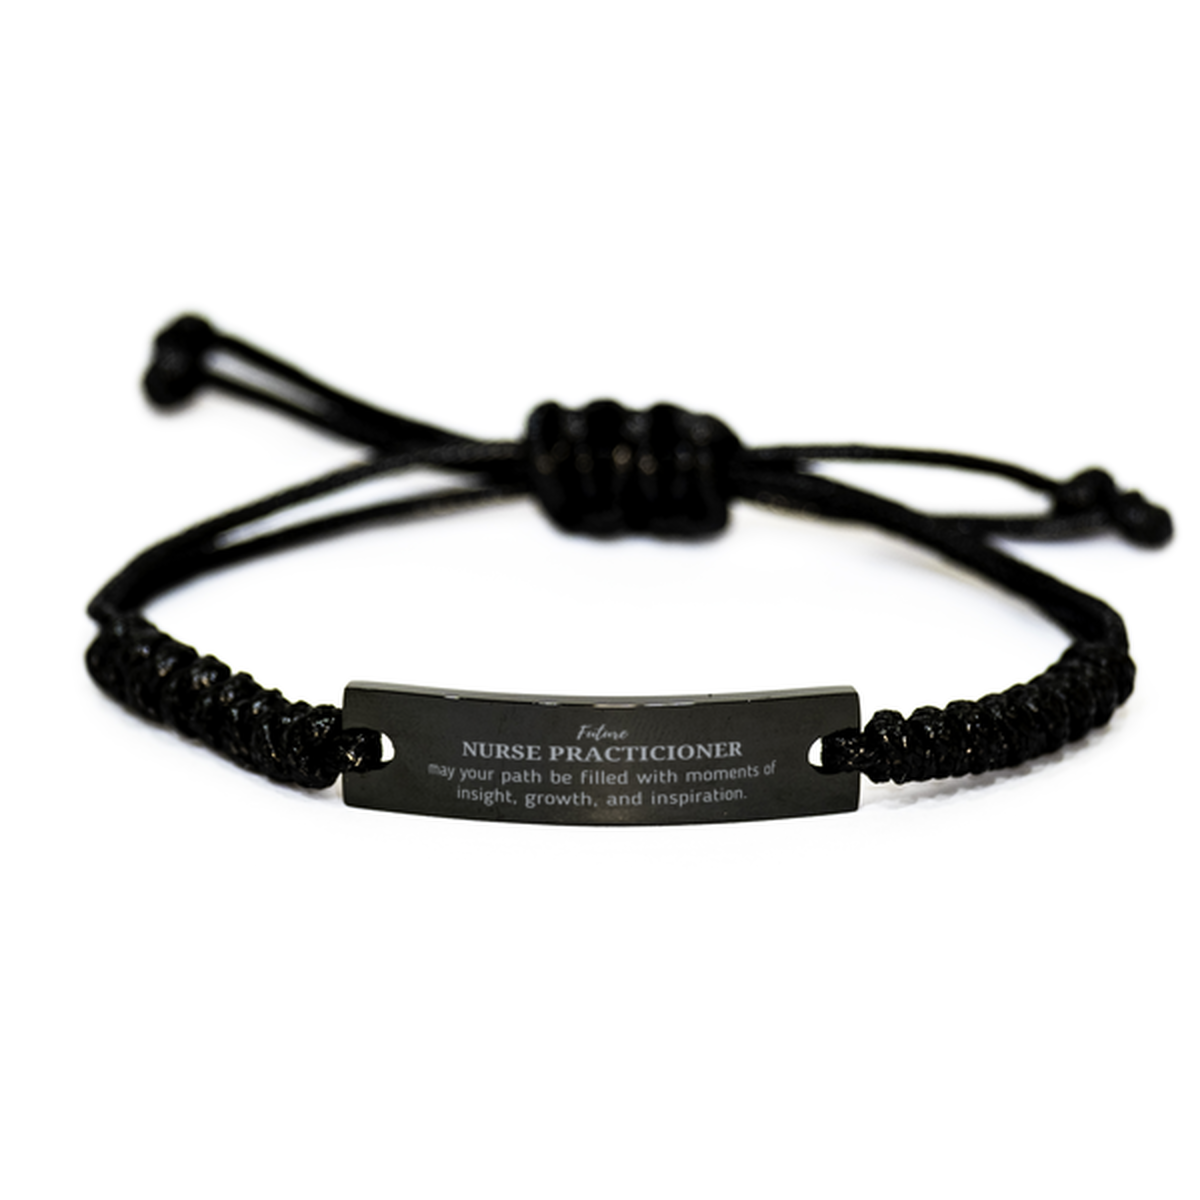 Future Nurse Practicioner Gifts, May your path be filled with moments of insight, Graduation Gifts for New Nurse Practicioner, Christmas Unique Black Rope Bracelet For Men, Women, Friends